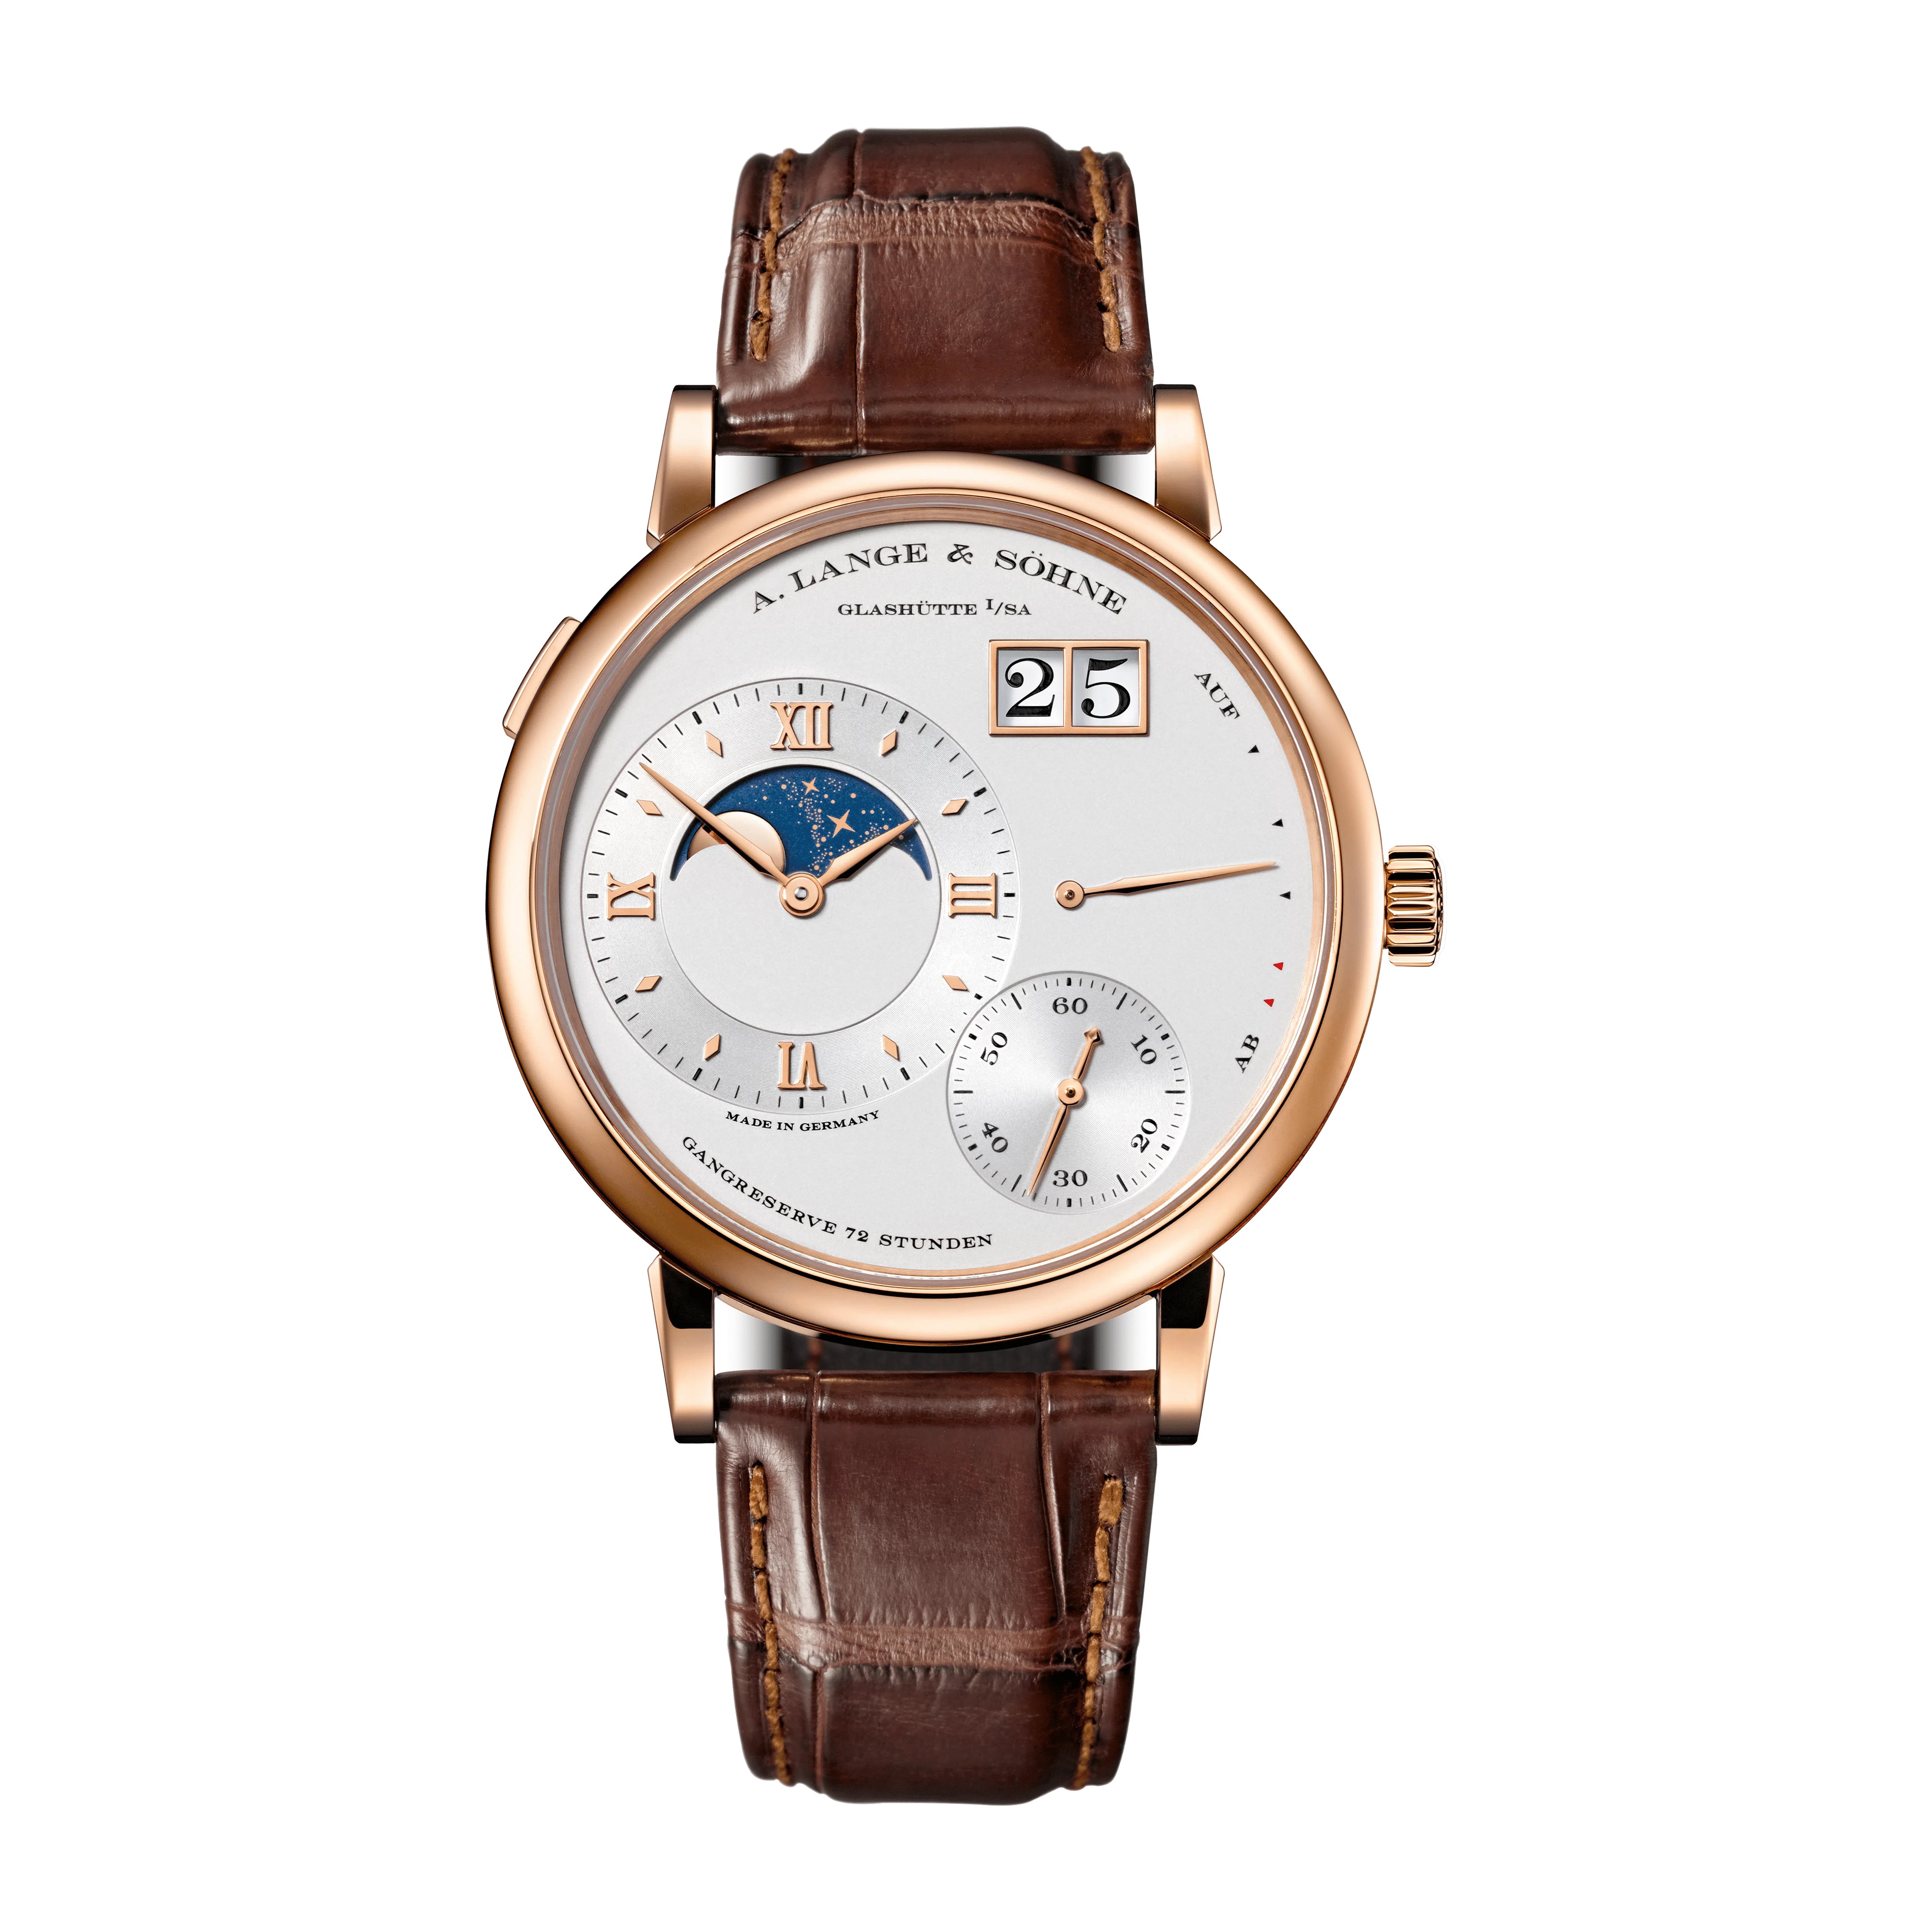 A.Lange & Sohne Grand Lange 1 Moon Phase Watch, 41mm Silver Dial, 139.032